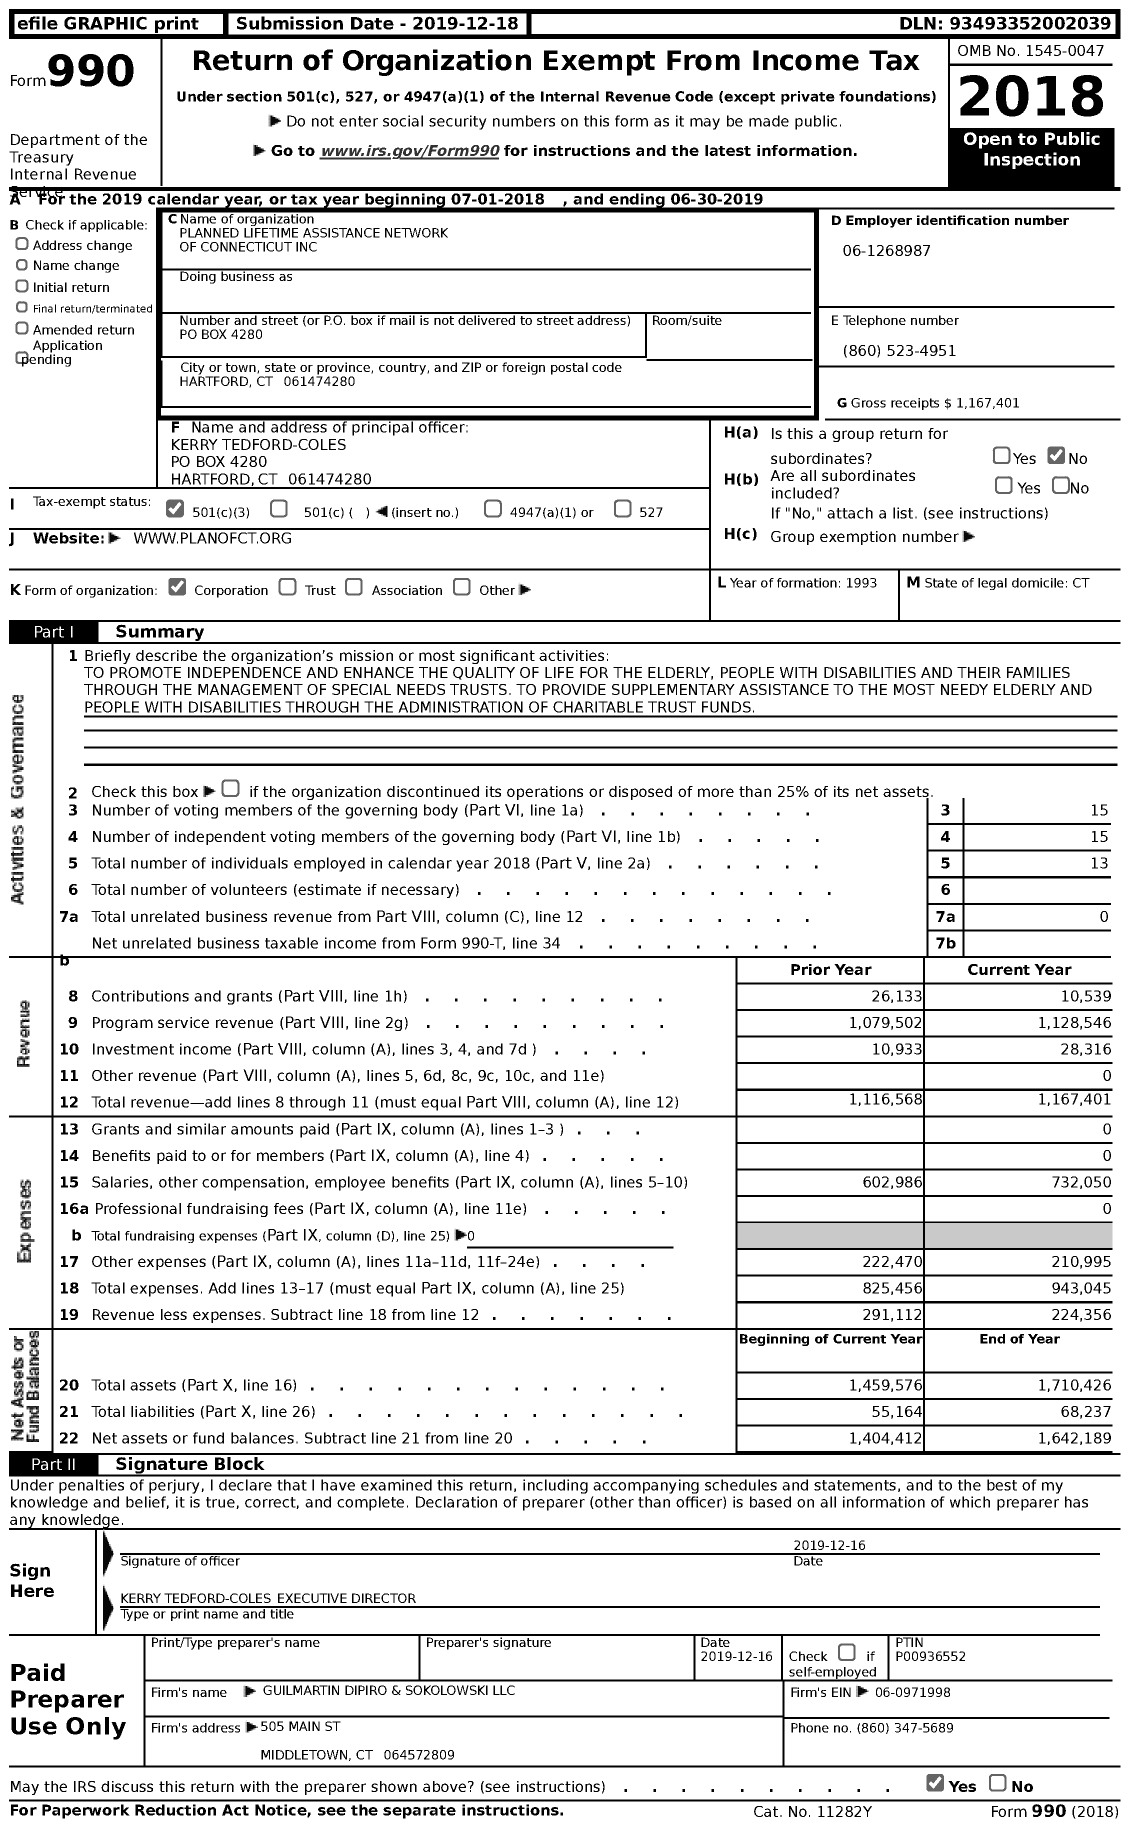 Image of first page of 2018 Form 990 for Planned Lifetime Assistance Network of Connecticut